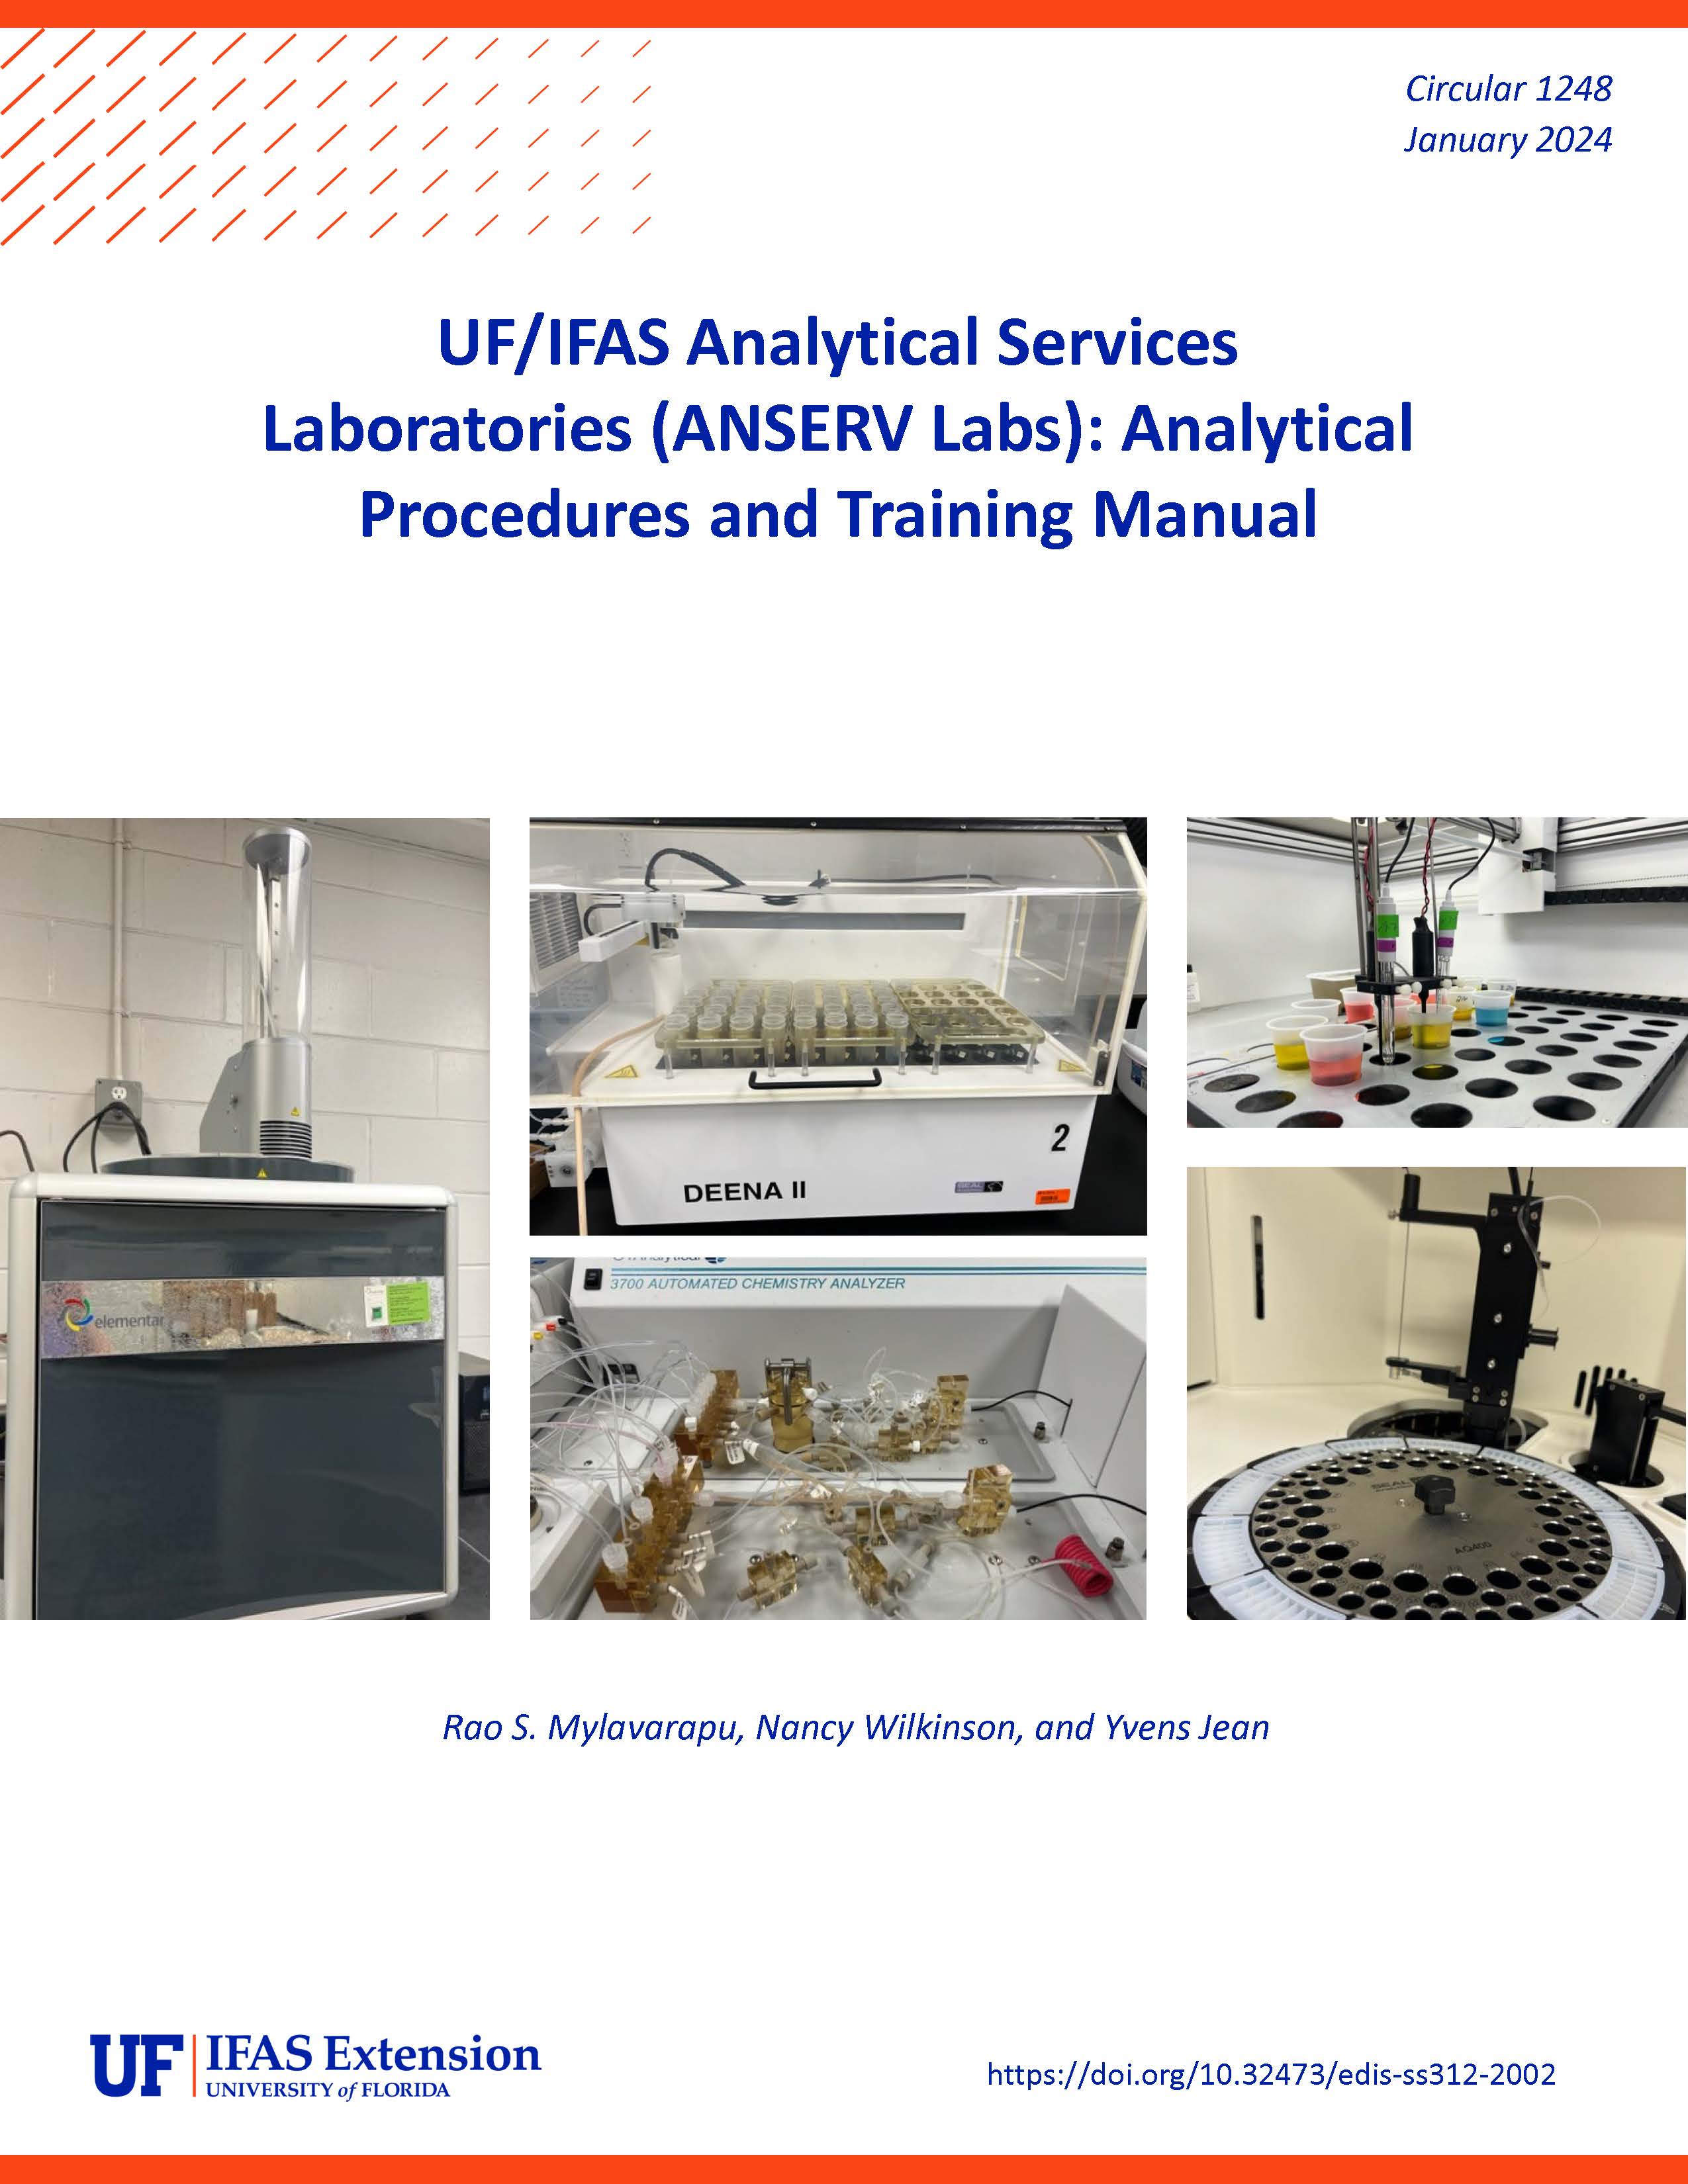 Cover page image including pictures of various ANSERV Labs instruments.